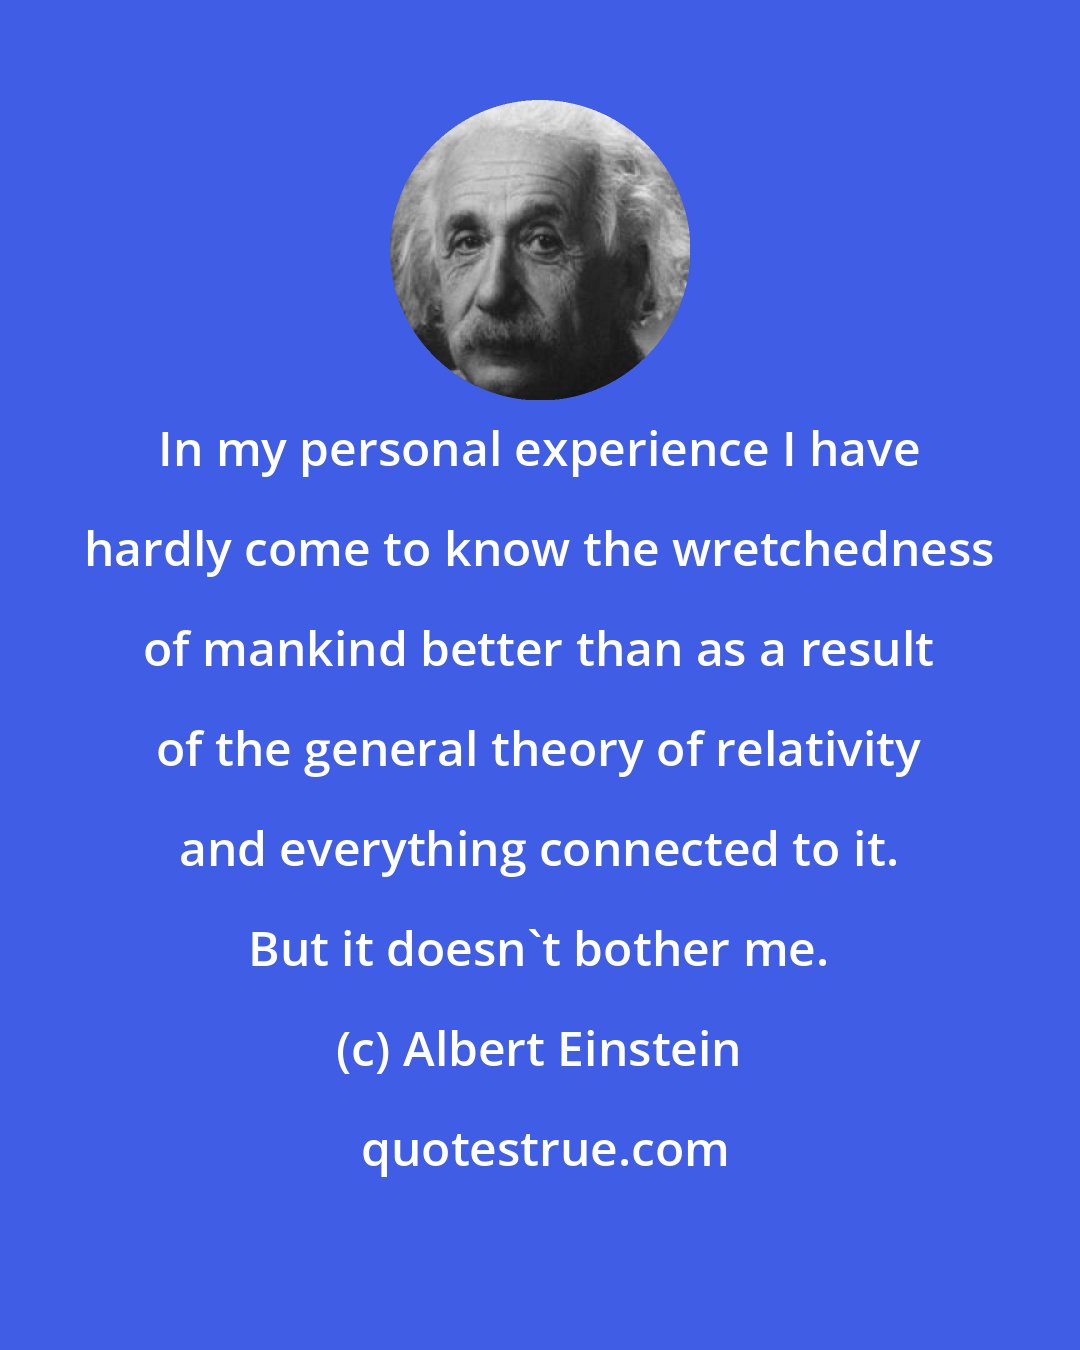 Albert Einstein: In my personal experience I have hardly come to know the wretchedness of mankind better than as a result of the general theory of relativity and everything connected to it. But it doesn't bother me.